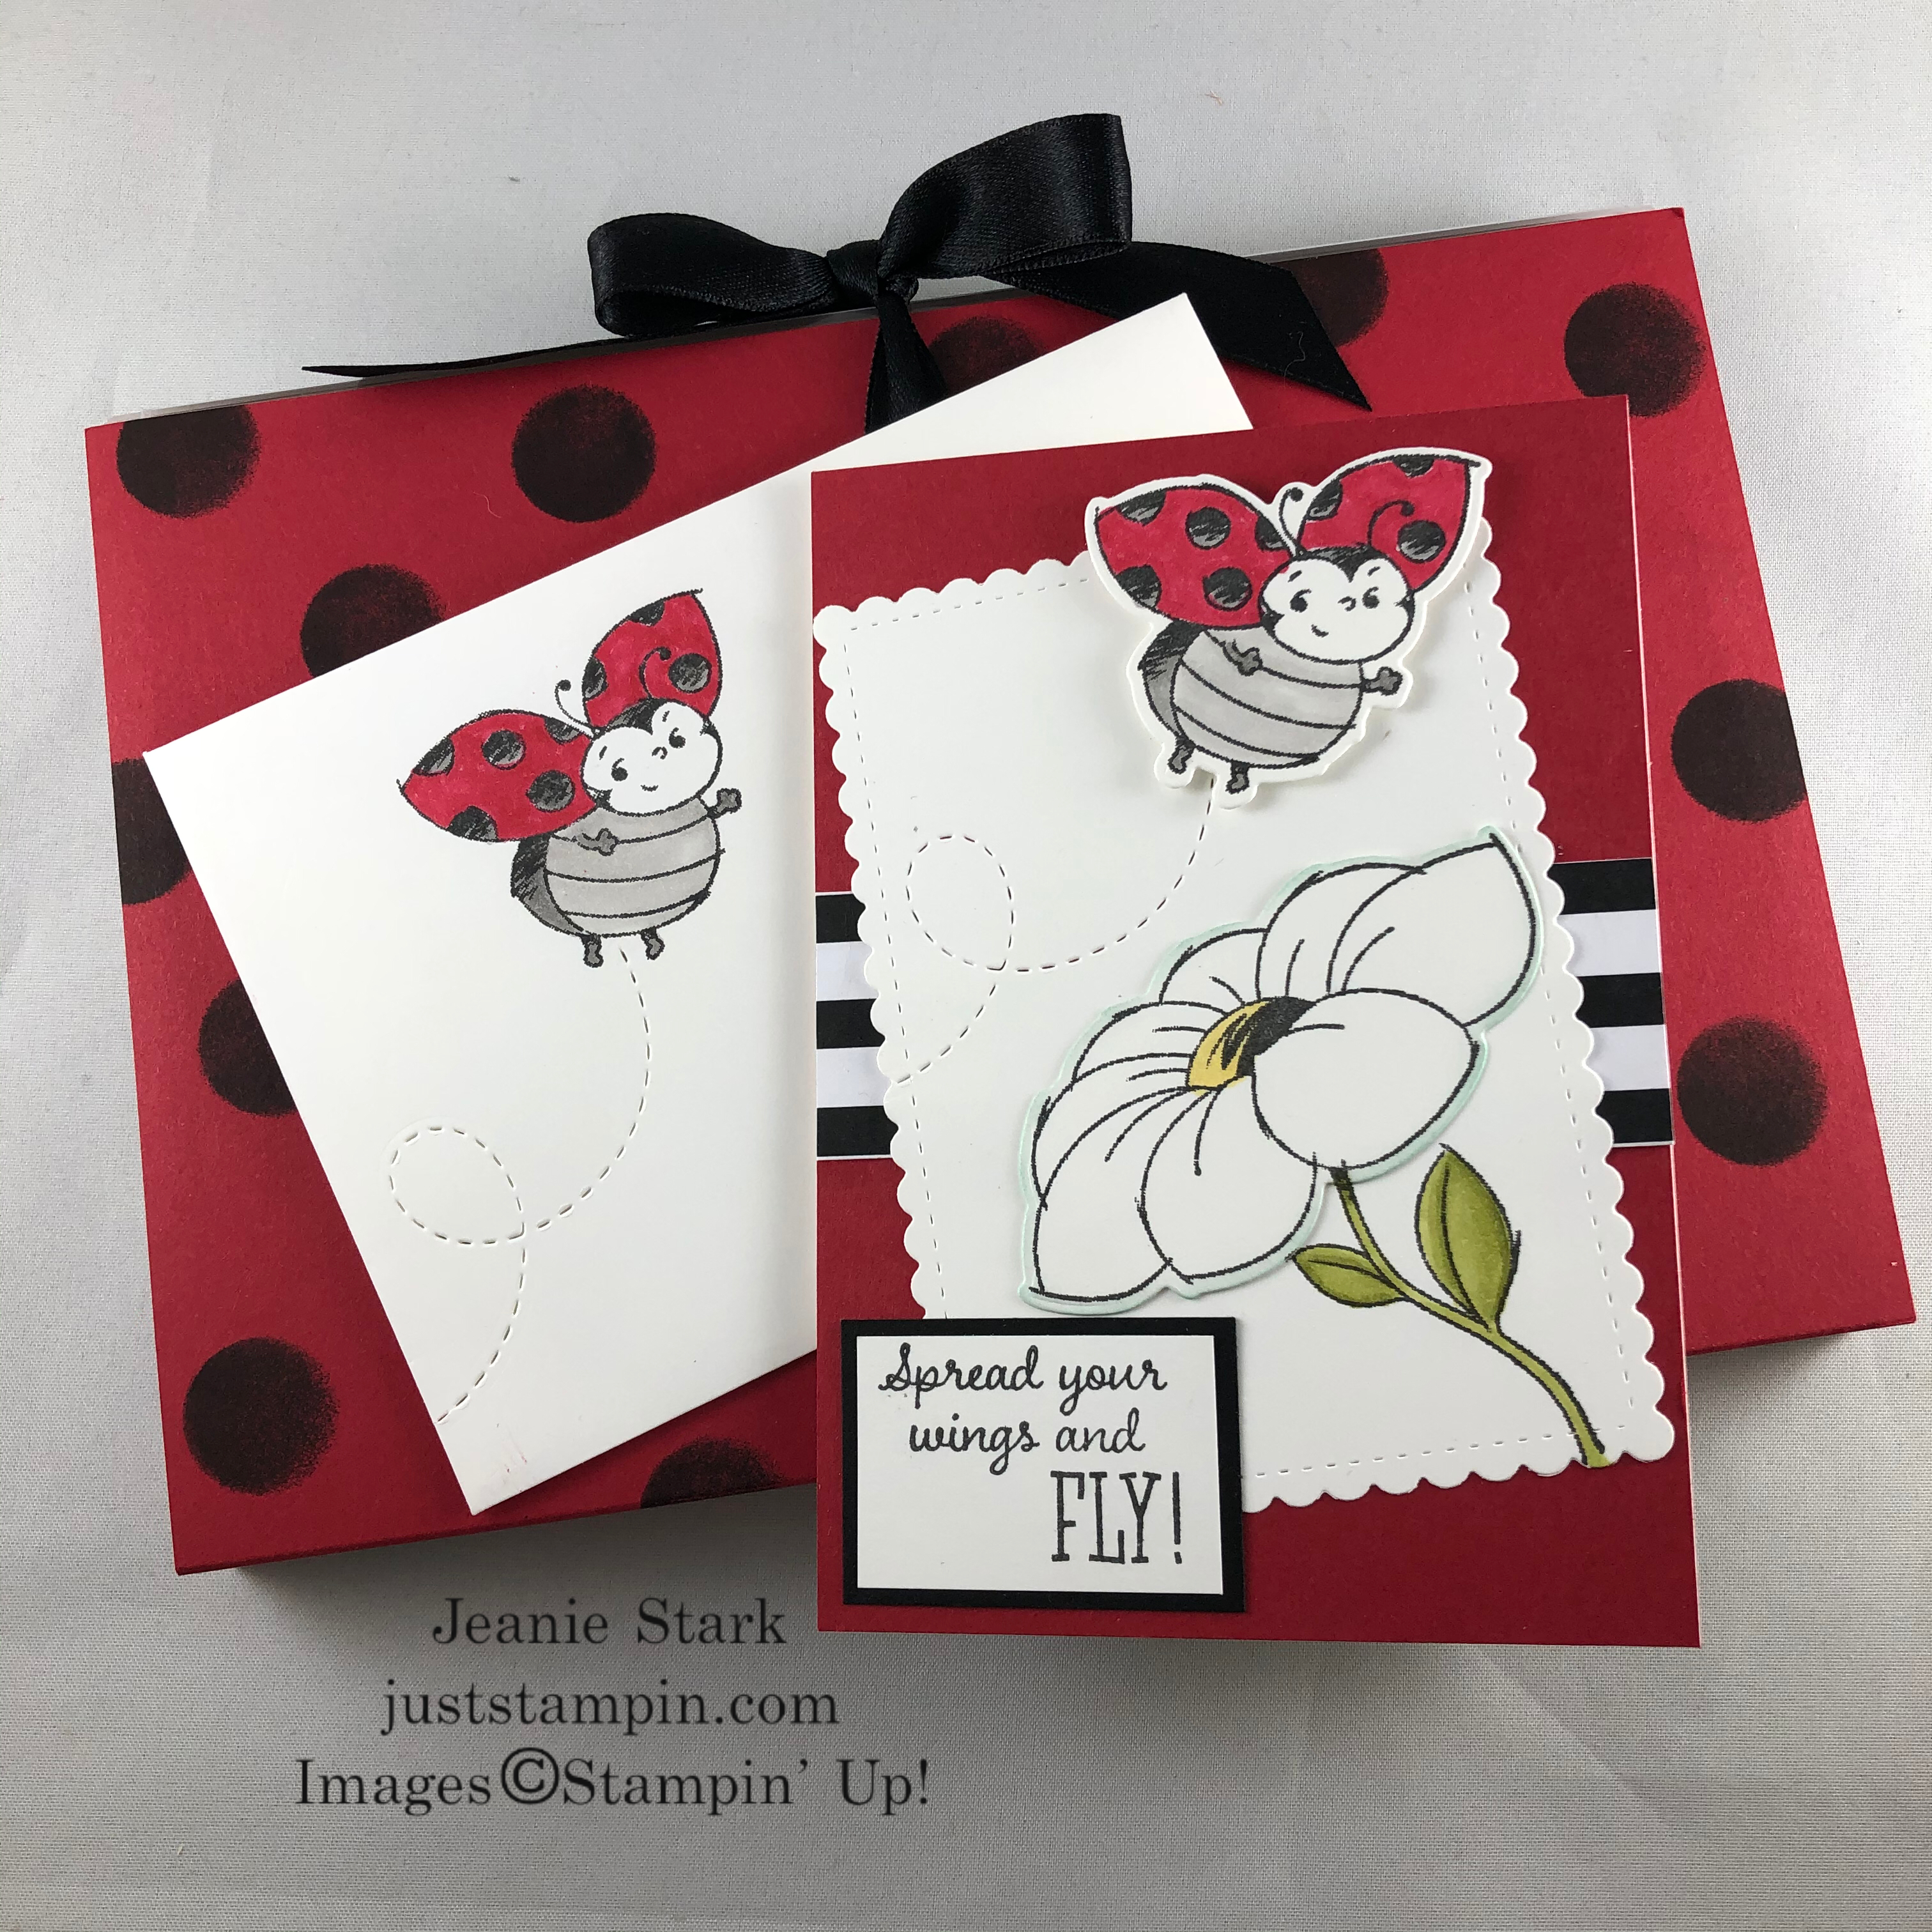 Stampin' Up! Little Ladybug note card featuring the Ladybug dies - Jeanie Stark StampinUp